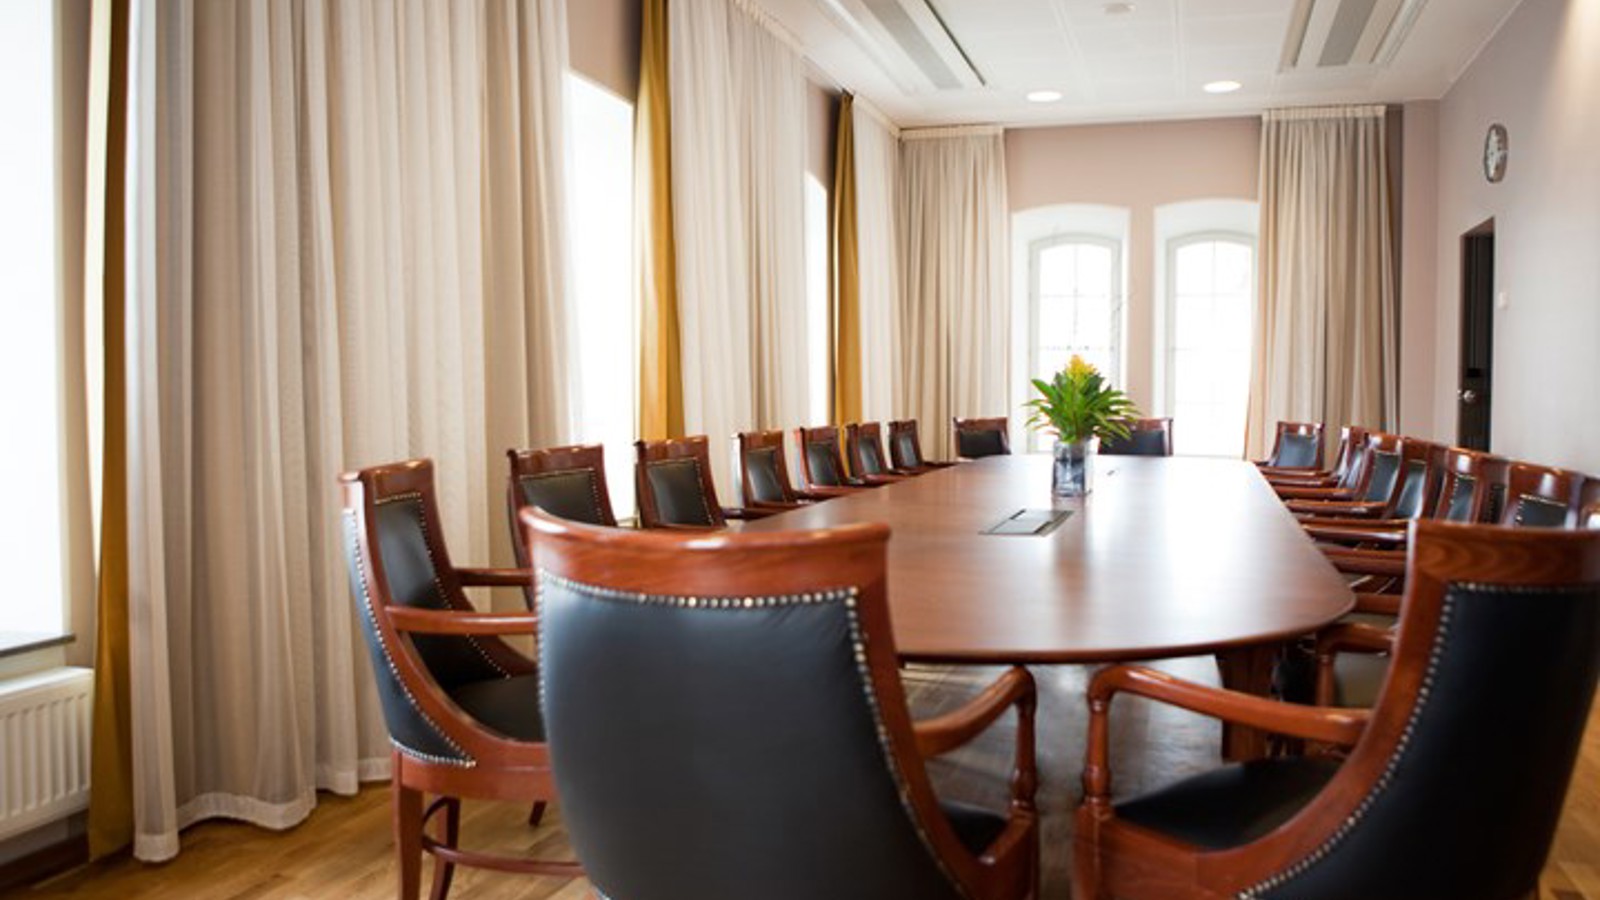 Conference room with board seating, brown table and large windows